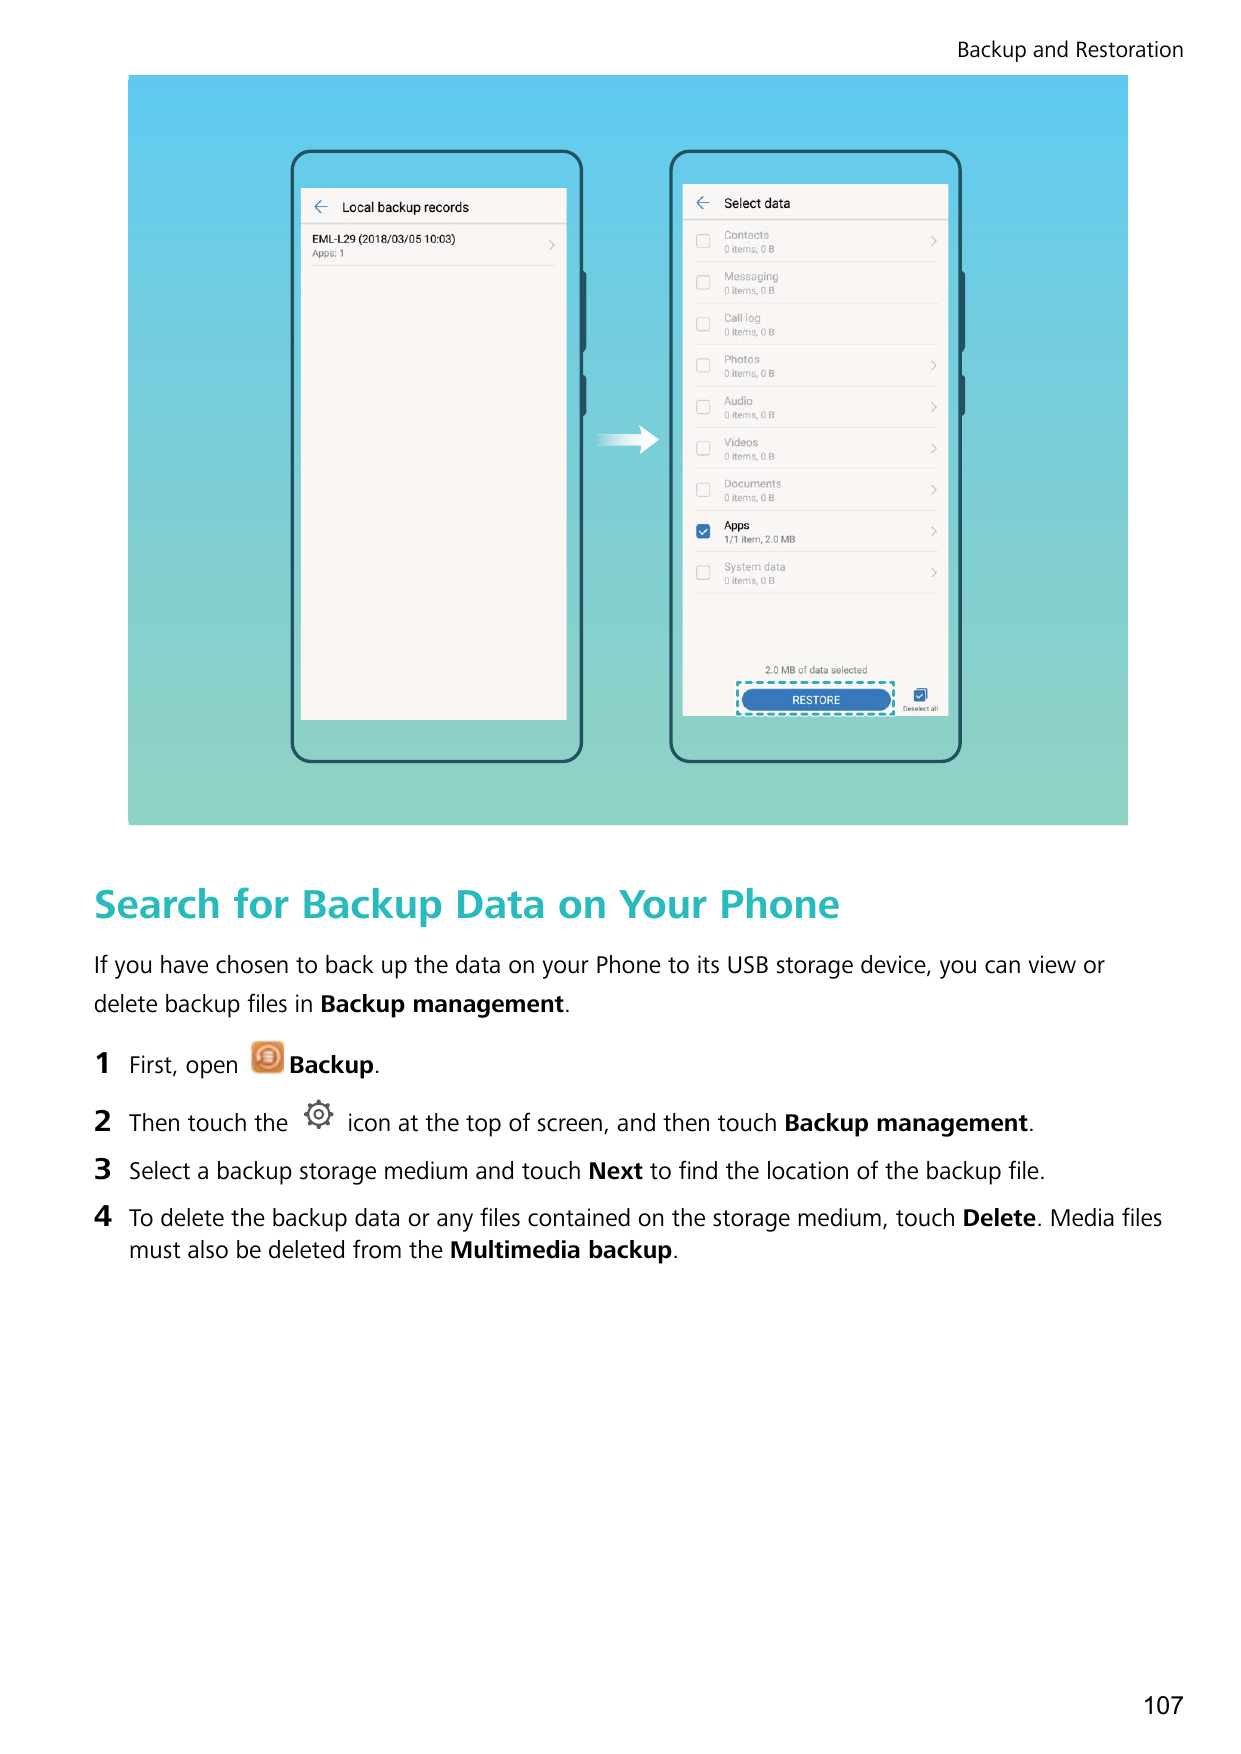 Backup and RestorationSearch for Backup Data on Your PhoneIf you have chosen to back up the data on your Phone to its USB storag